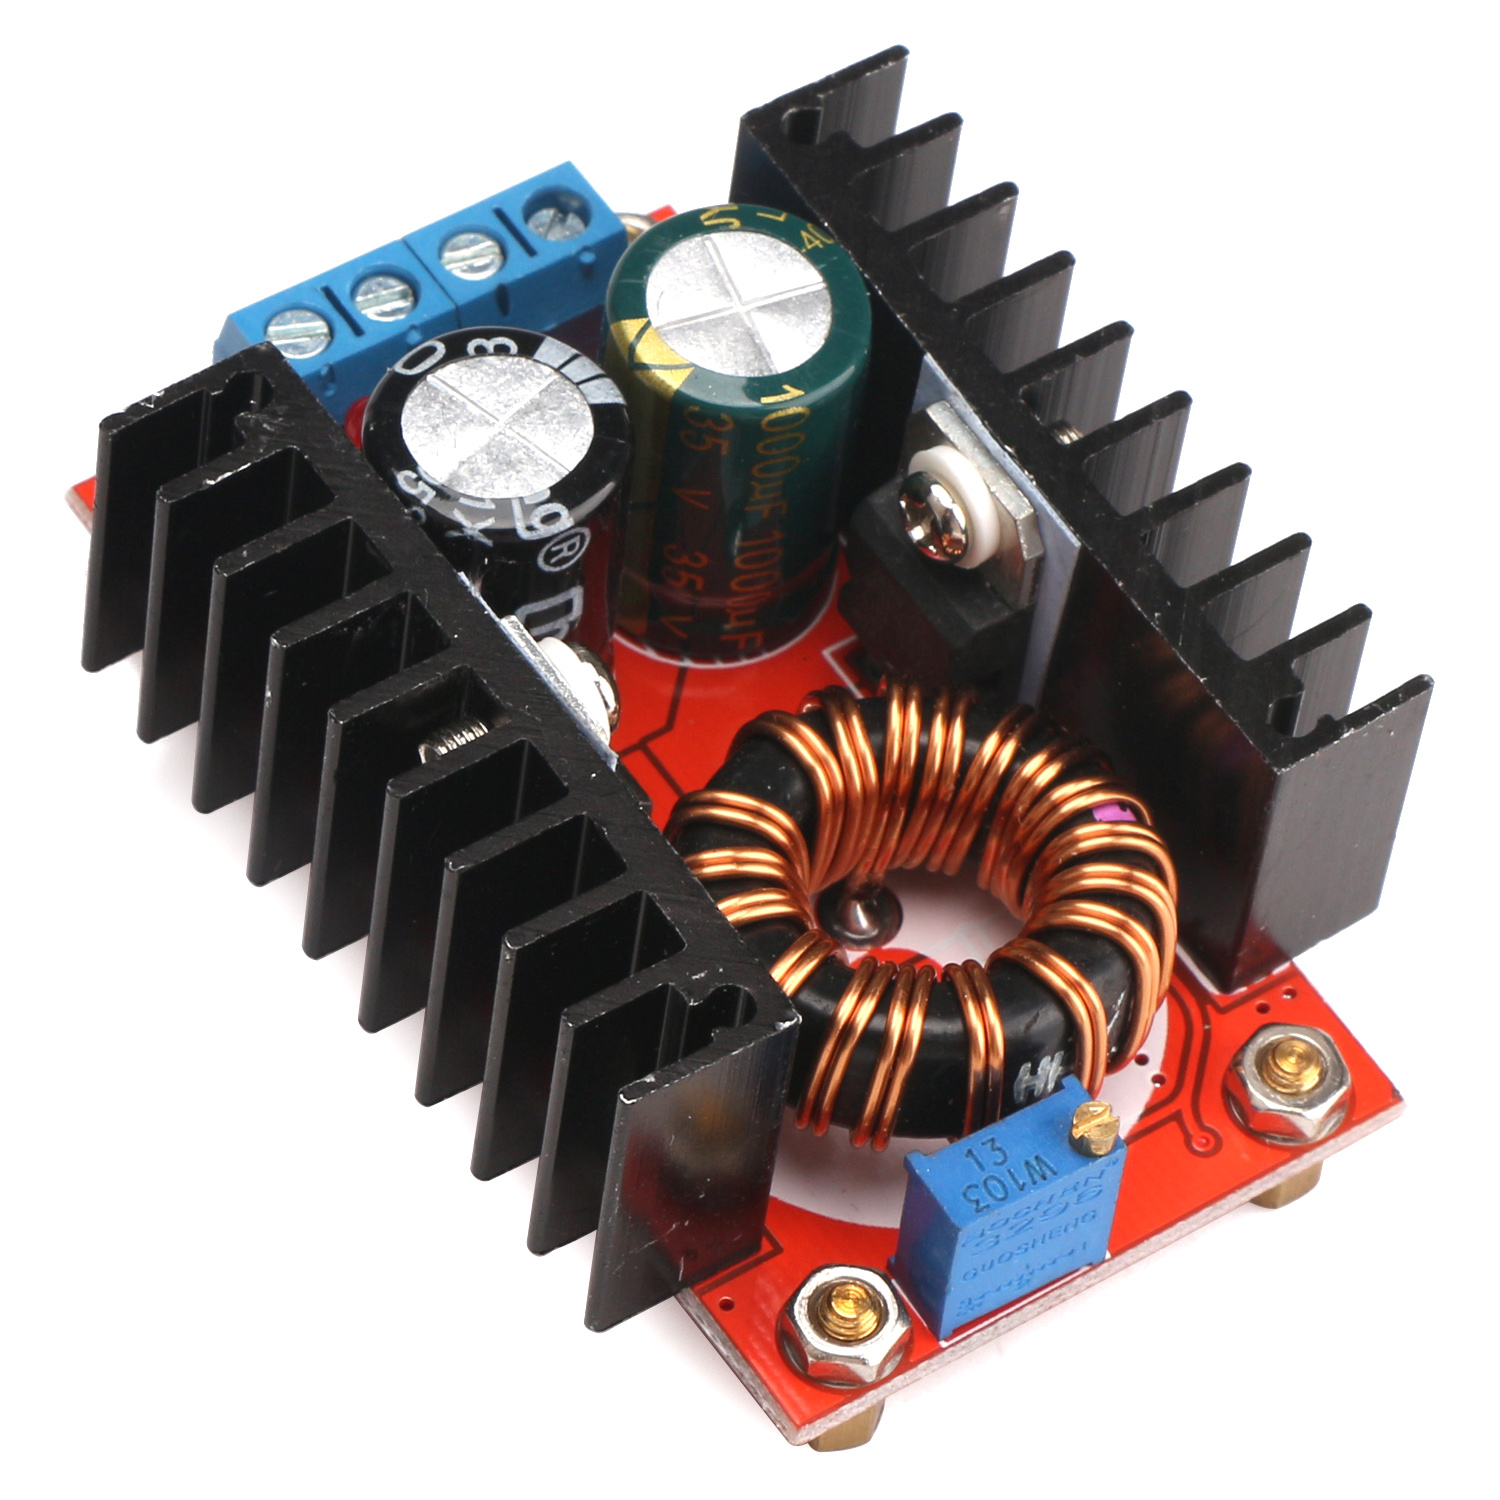 DC-DC Step up Converter Boost Power Supply Module 10-32V to 35-60V 120W 